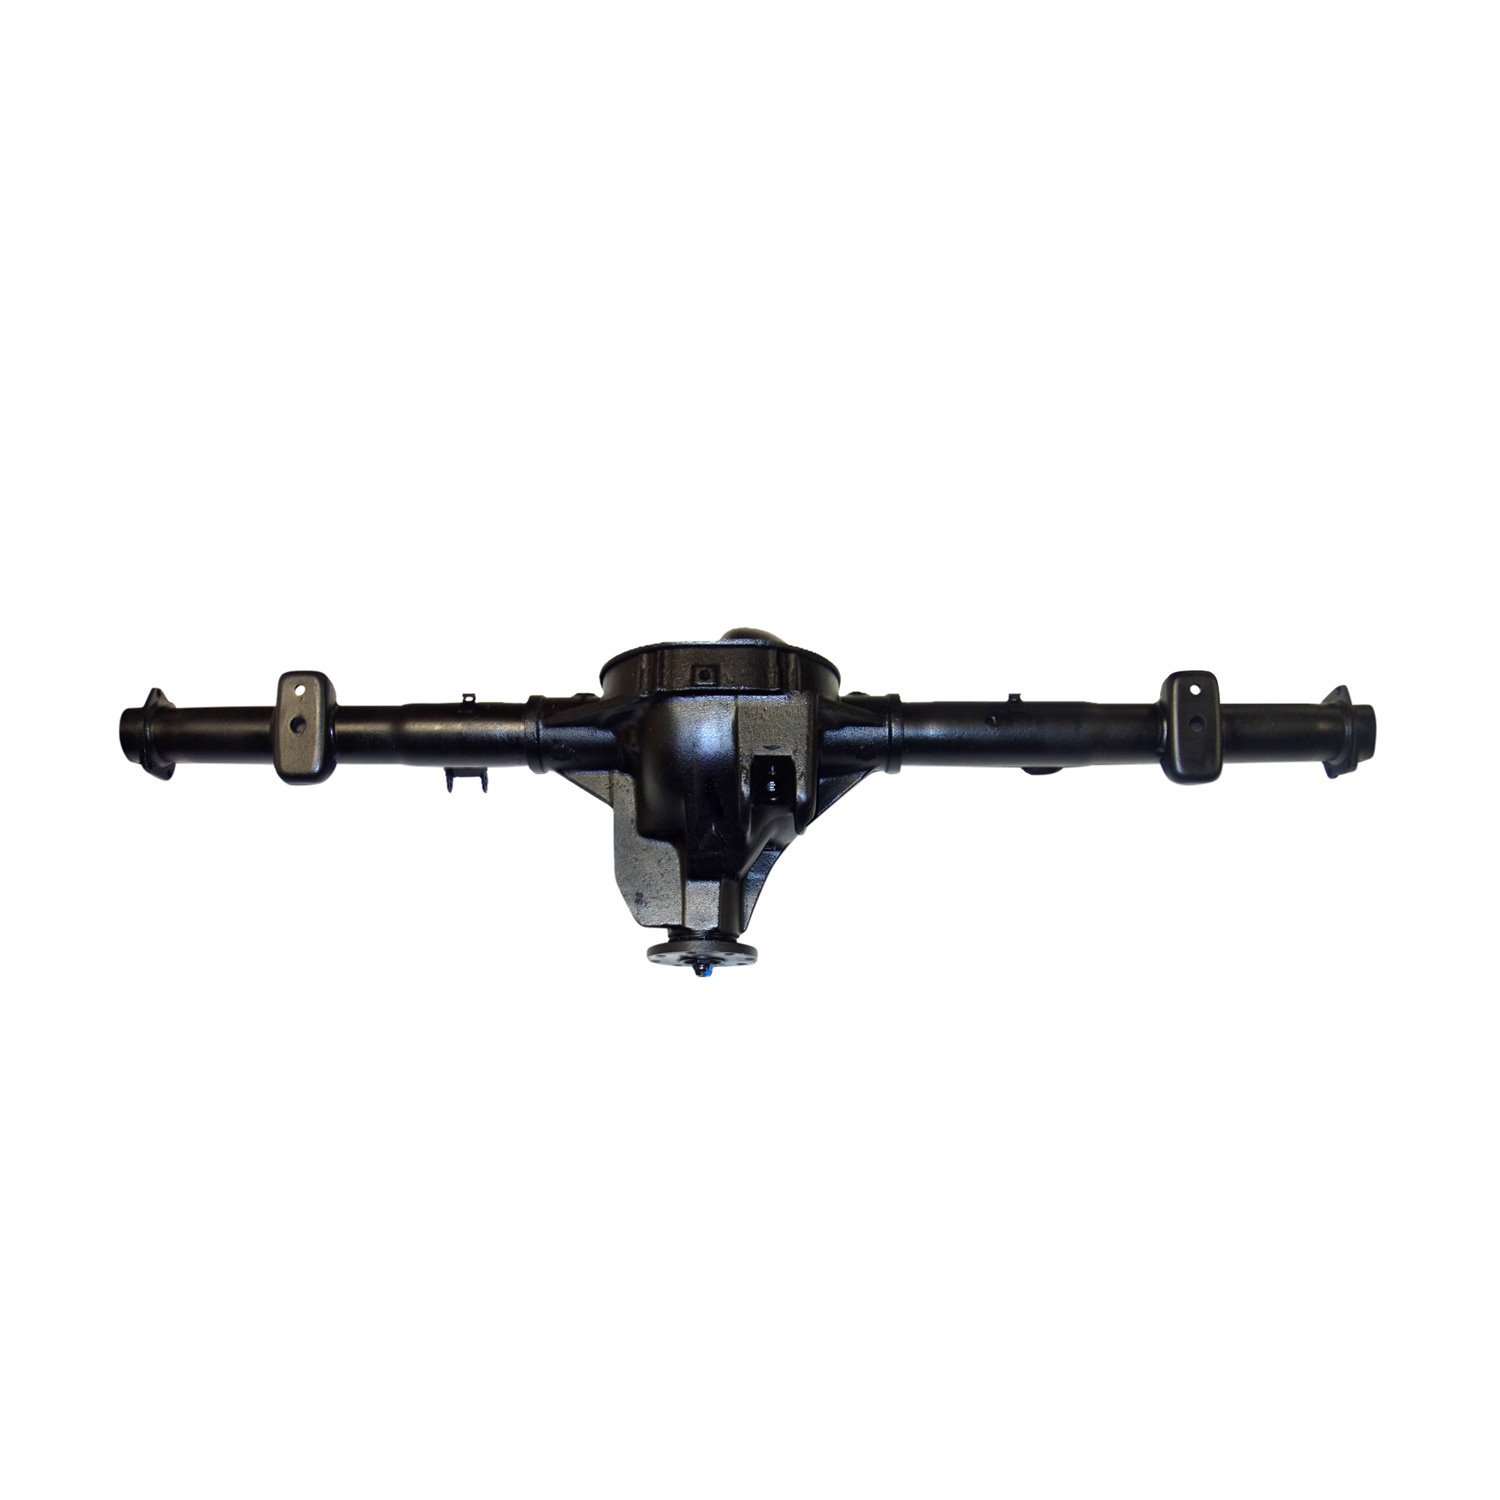 Remanufactured Complete Axle Assembly for Ford 8.8" 10-11 Ford Ranger 3.73 , Disc Brakes